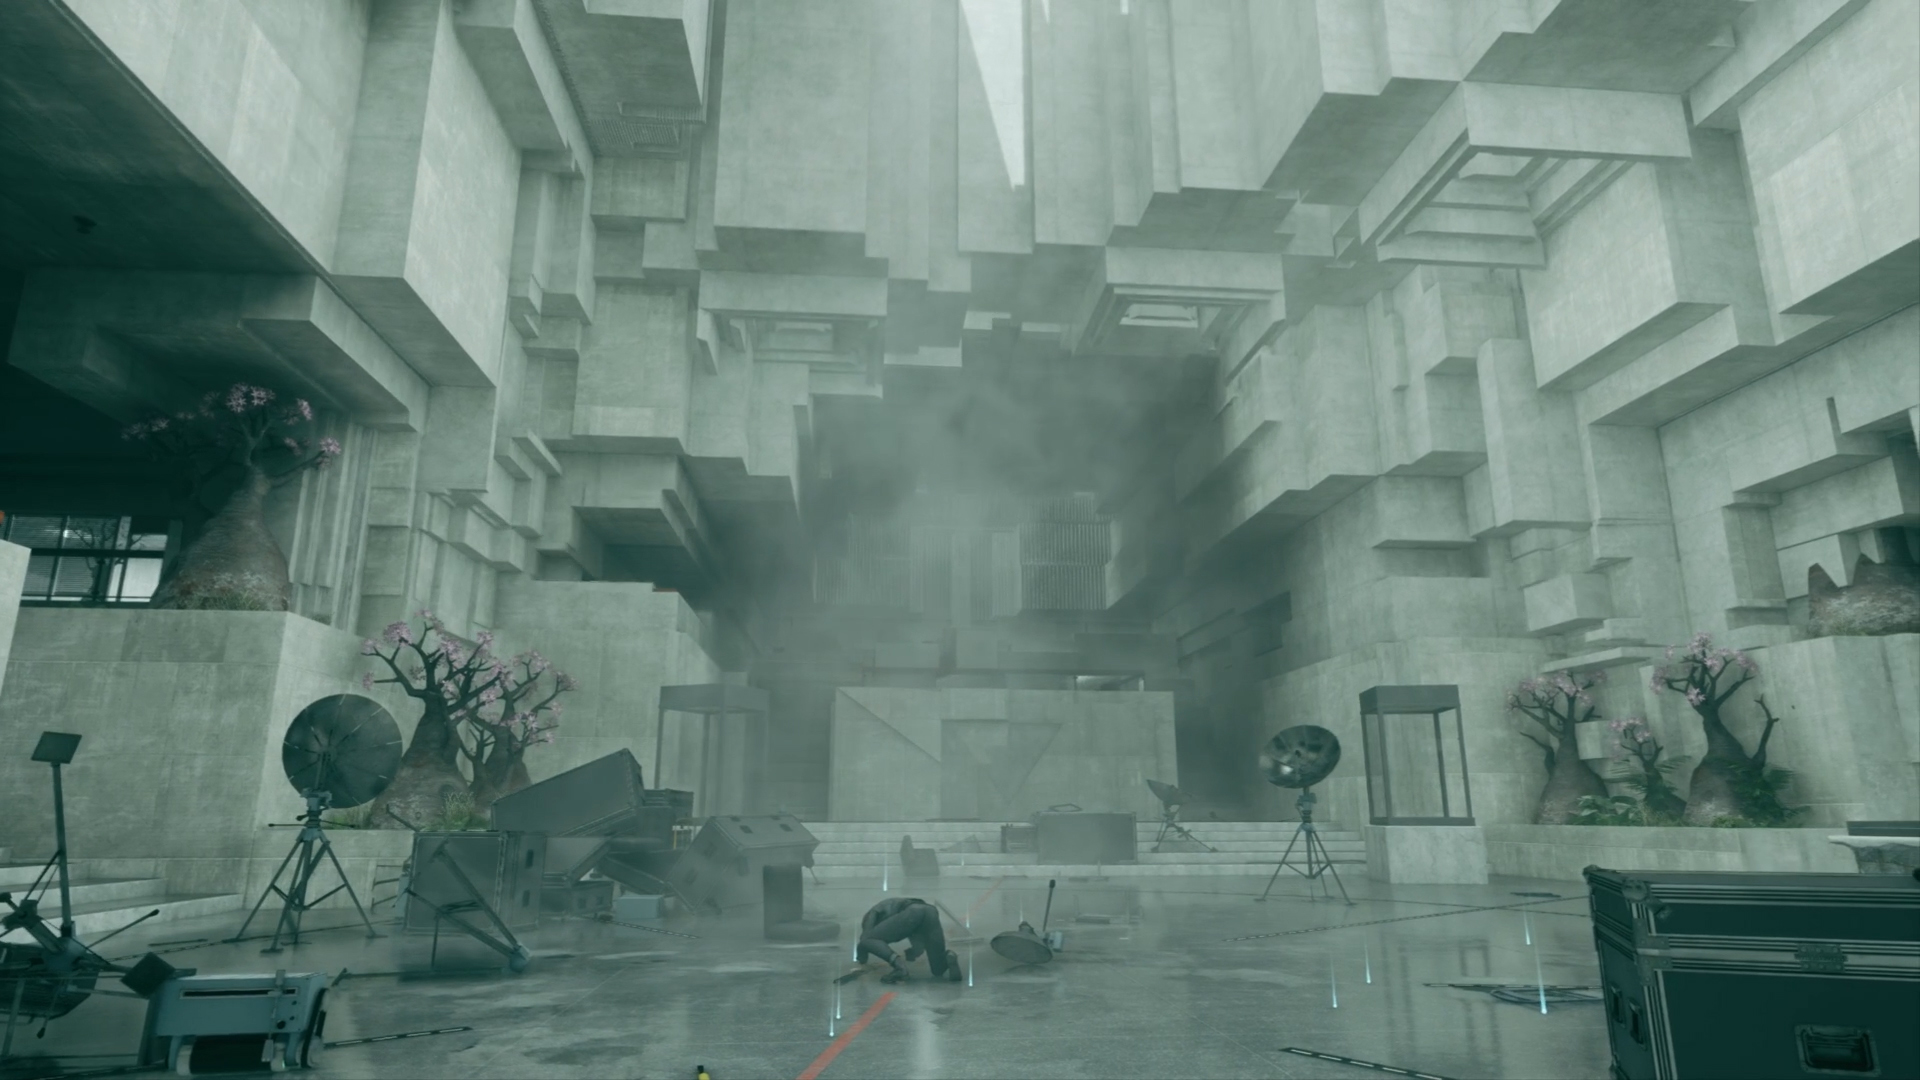 Level design in *Control* relies heavily on brutalist architecture but also pushes the design vocabulary of brutalism to its extremes.